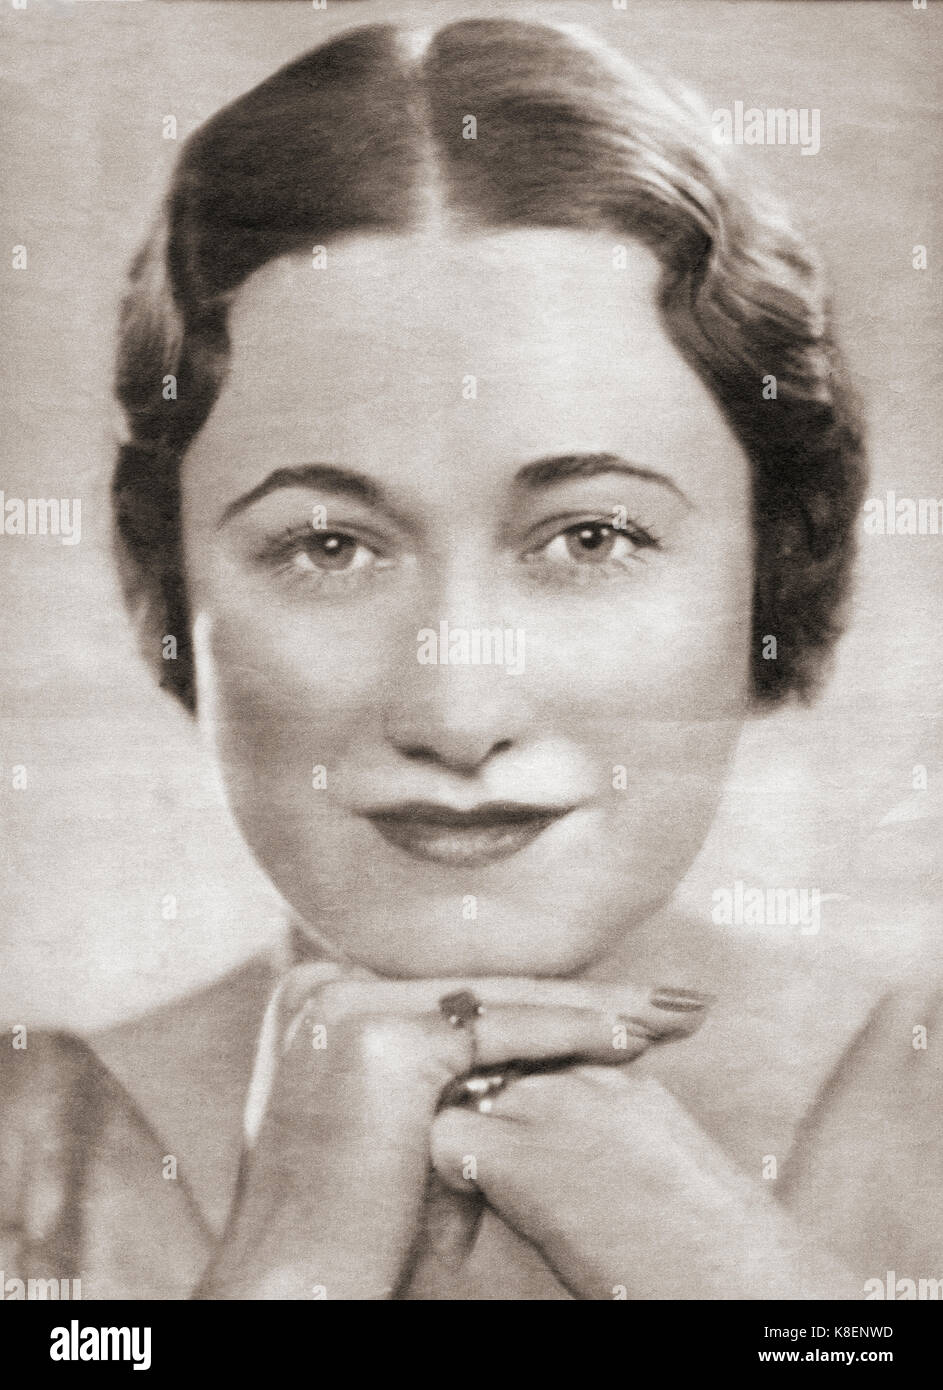 Wallis Simpson, later the Duchess of Windsor, born Bessie Wallis Warfield, 1896 – 1986. American socialite for whom King Edward VIII abdicated in 1936.  From The Weekly Illustrated, published 1936. Stock Photo